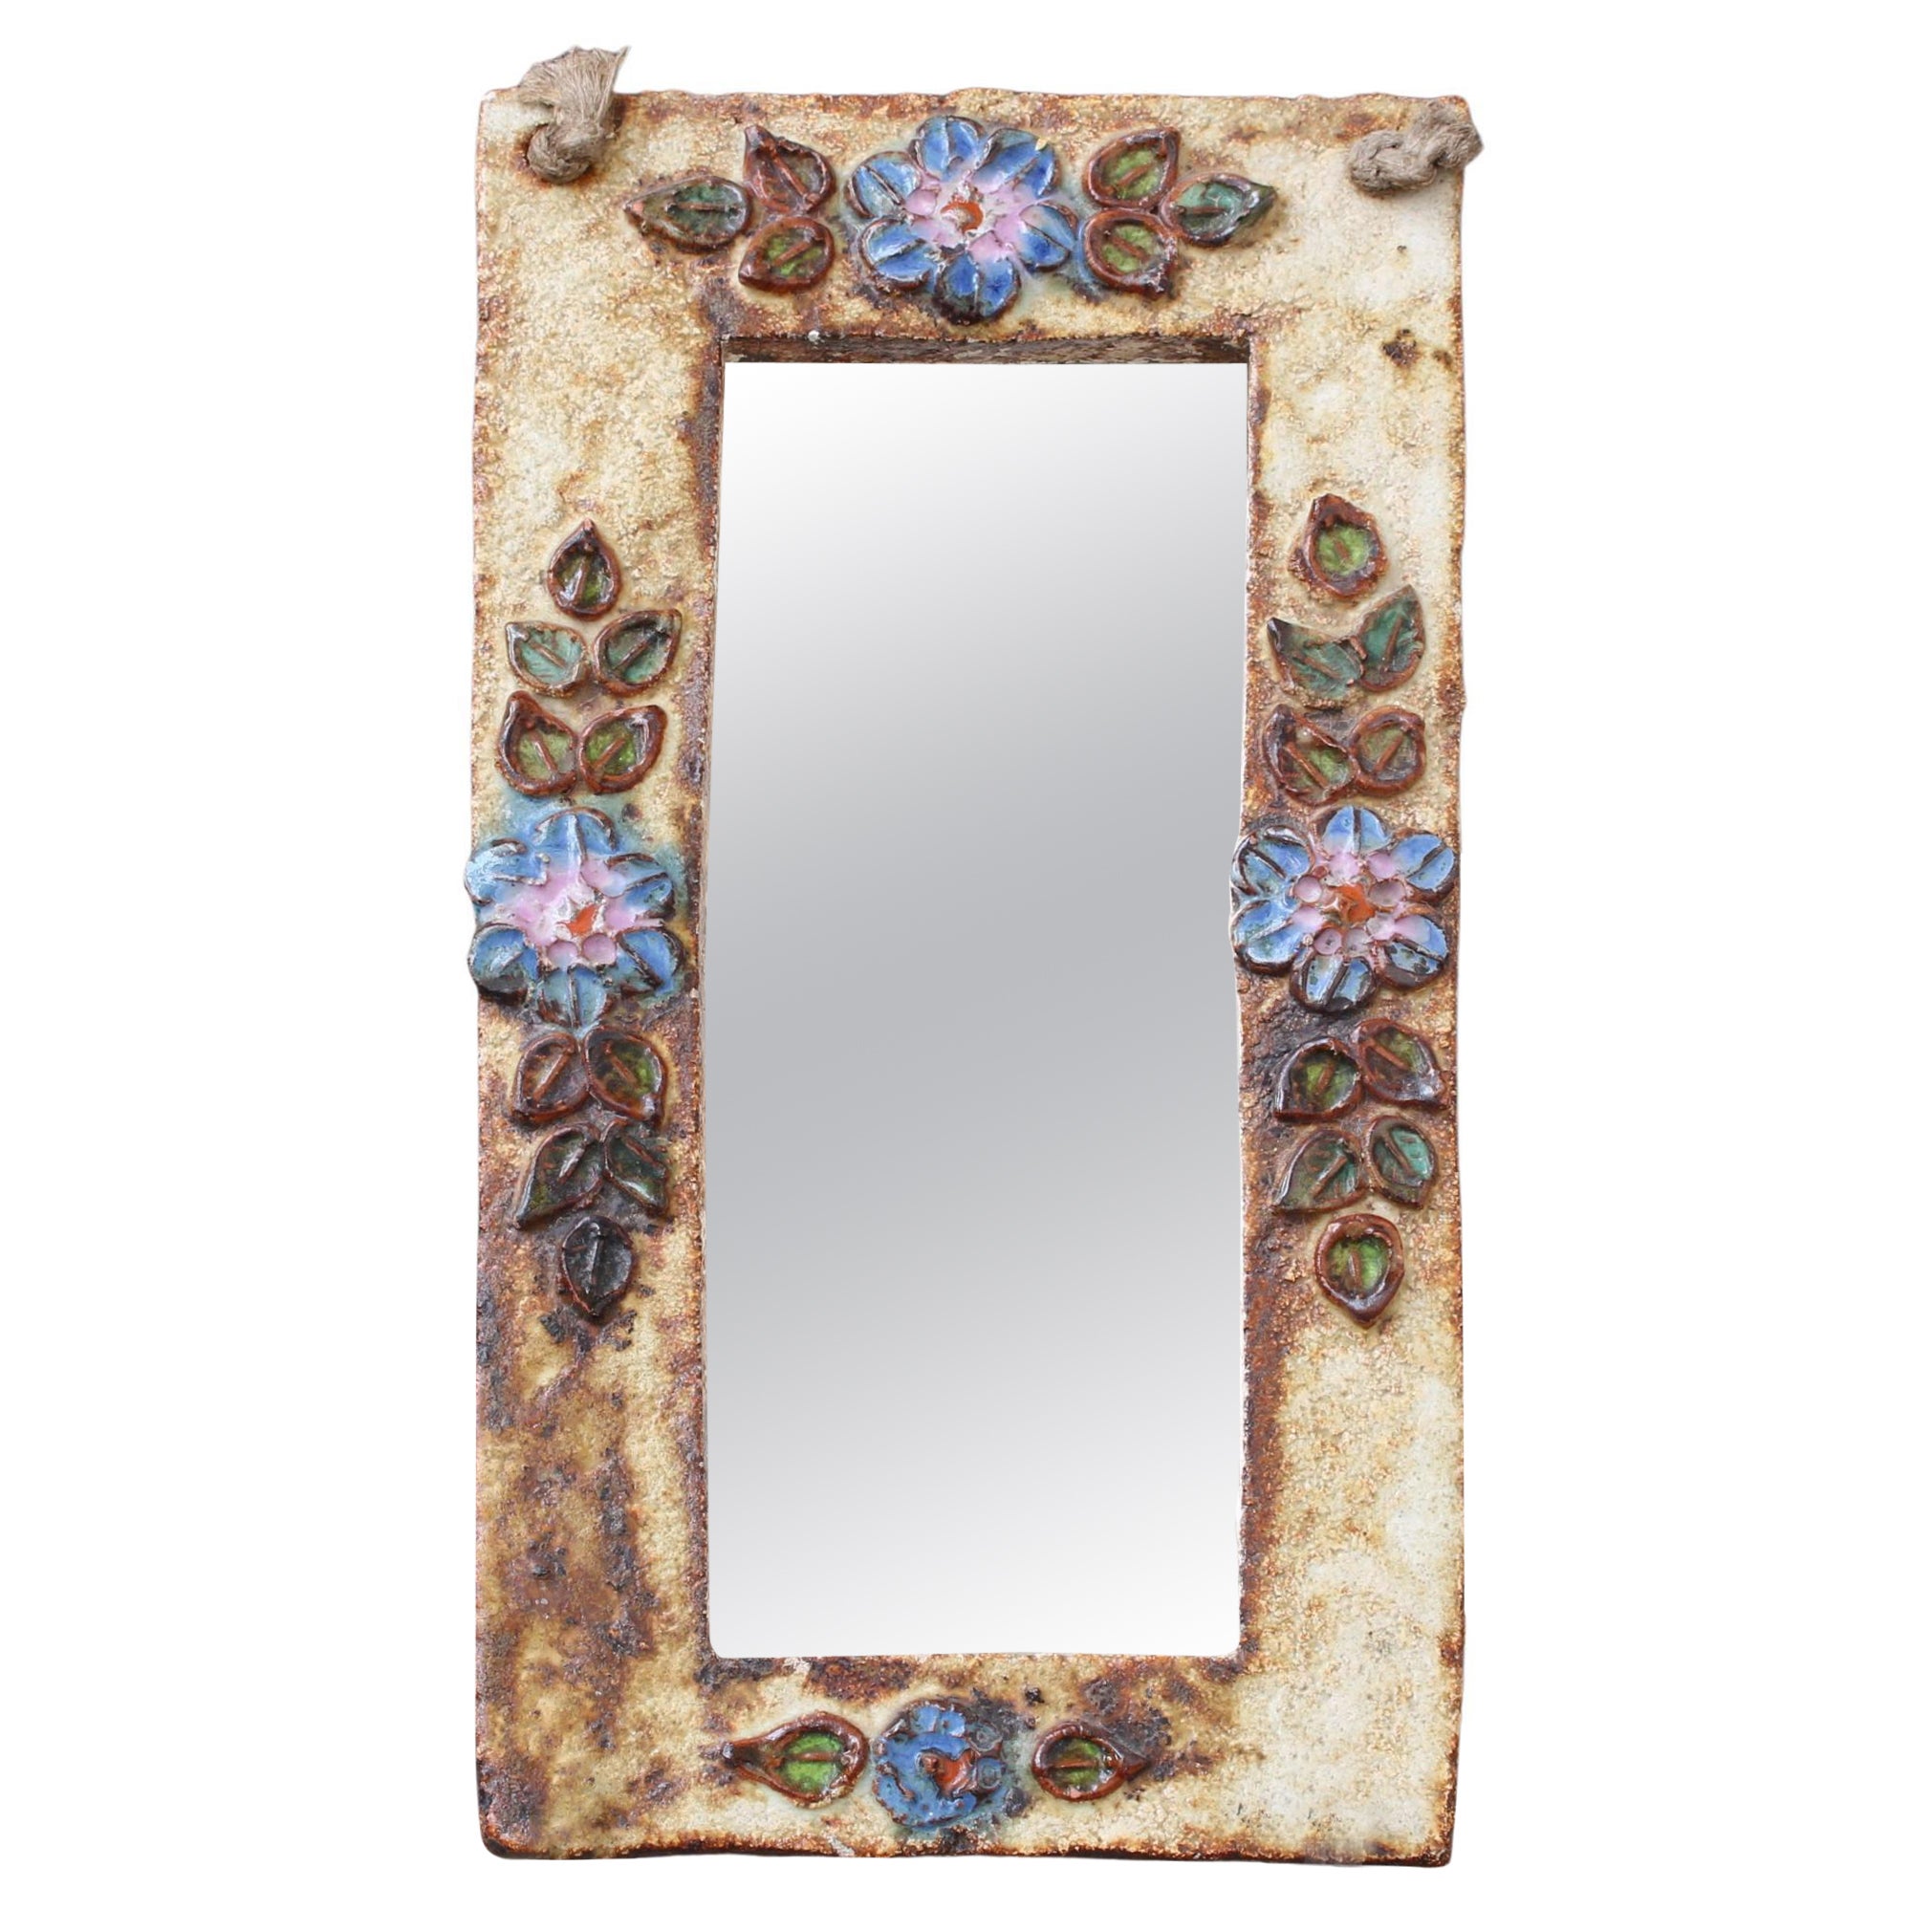 Ceramic Wall Mirror with Flower Motif by La Roue 'circa 1960s' For Sale